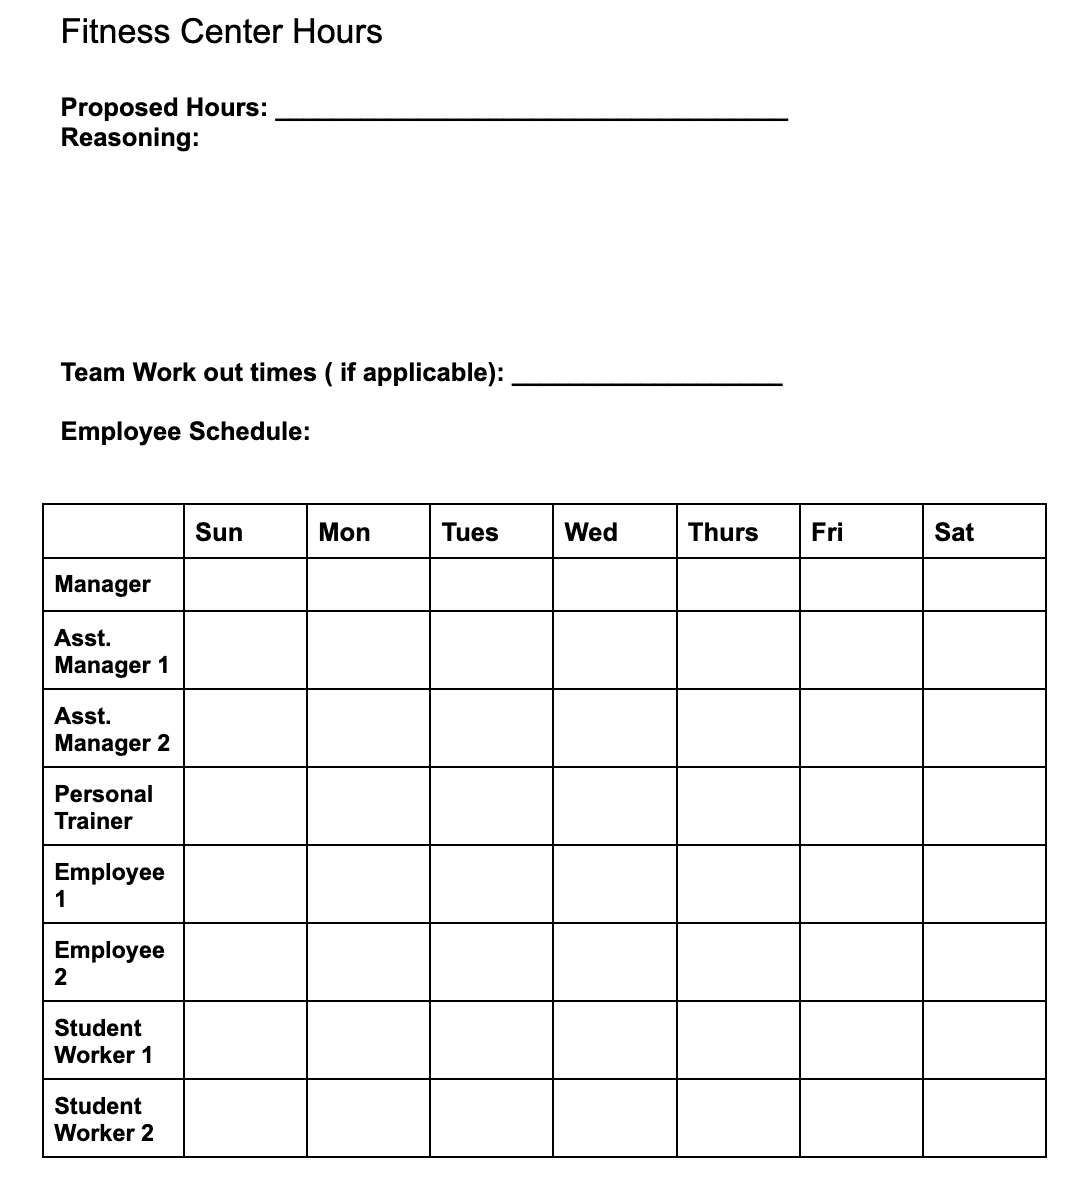 Fitness Center Hours
Proposed Hours:
Reasoning:
Team Work out times (if applicable):
Employee Schedule:
Manager
Asst.
Manager 1
Asst.
Manager 2
Personal
Trainer
Employee
1
Employee
2
Student
Worker 1
Student
Worker 2
Sun
Mon
Tues
Wed
Thurs
Fri
Sat